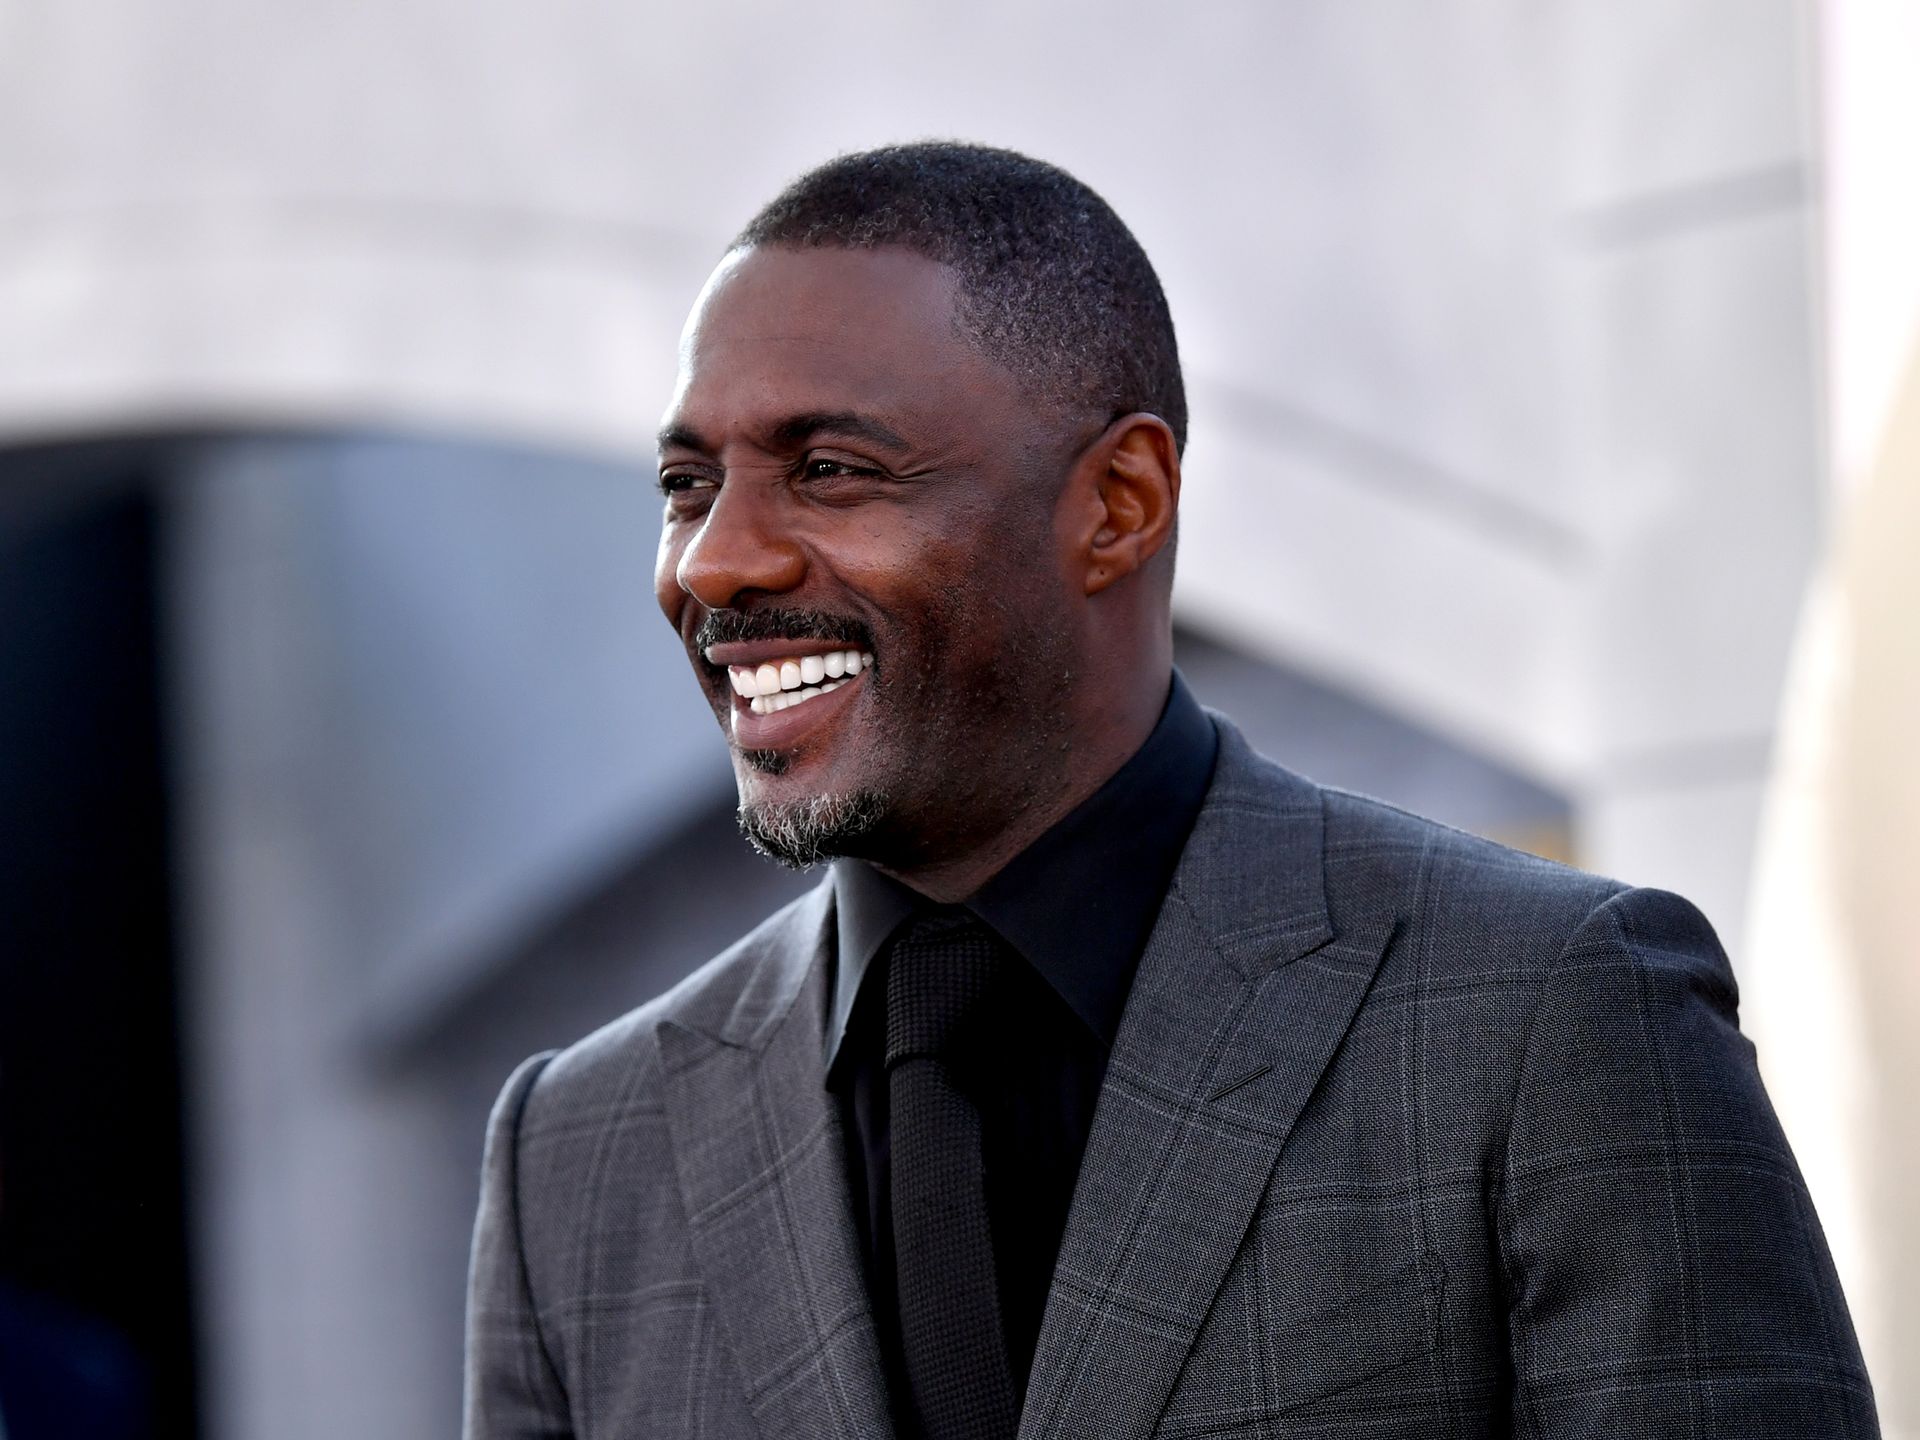 TV shows to watch: A thrilling 'Hijack' with the smashing Idris Elba